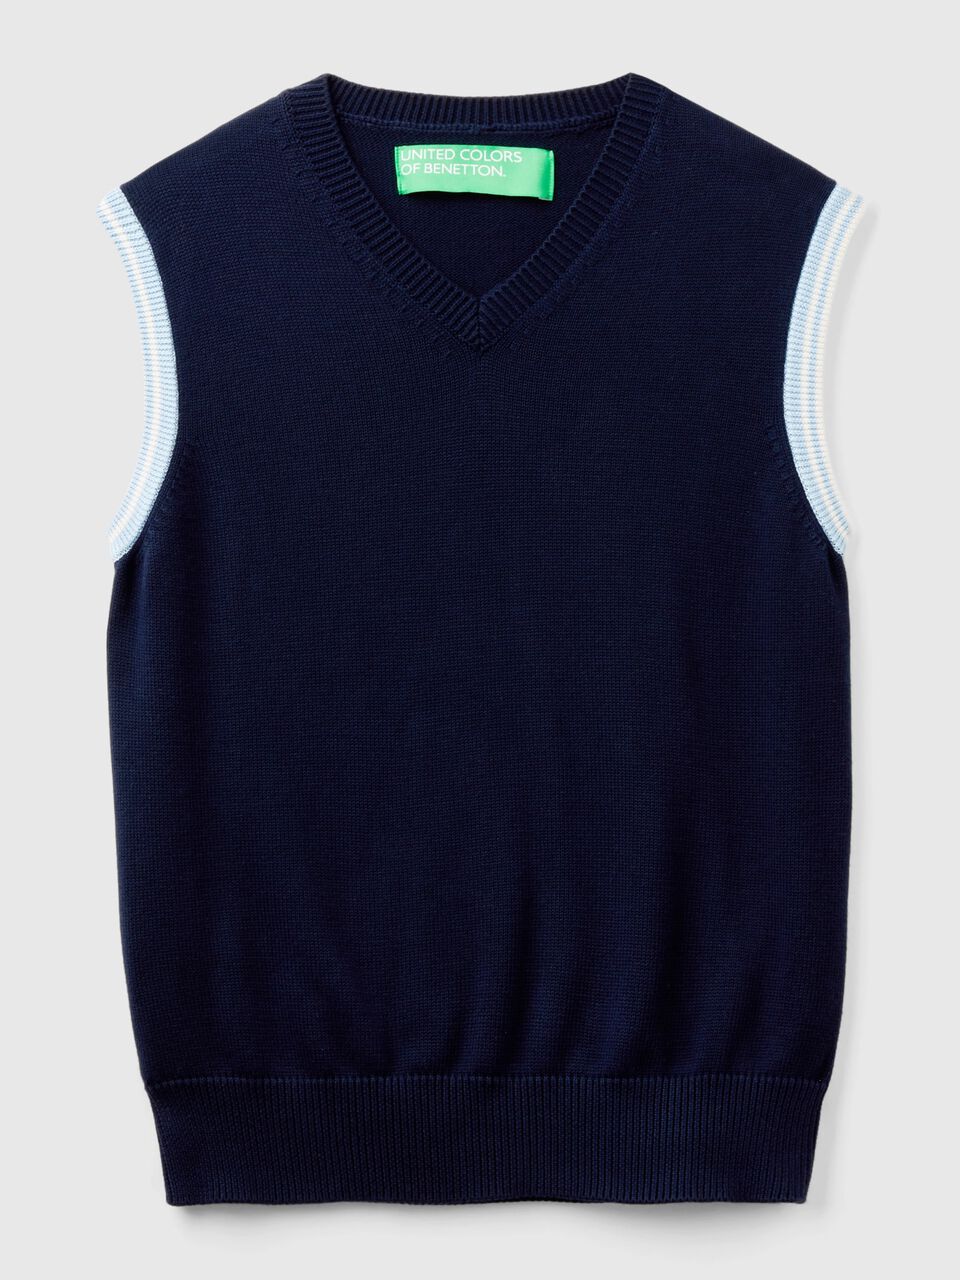 Relaxed Fit Cotton sweater vest